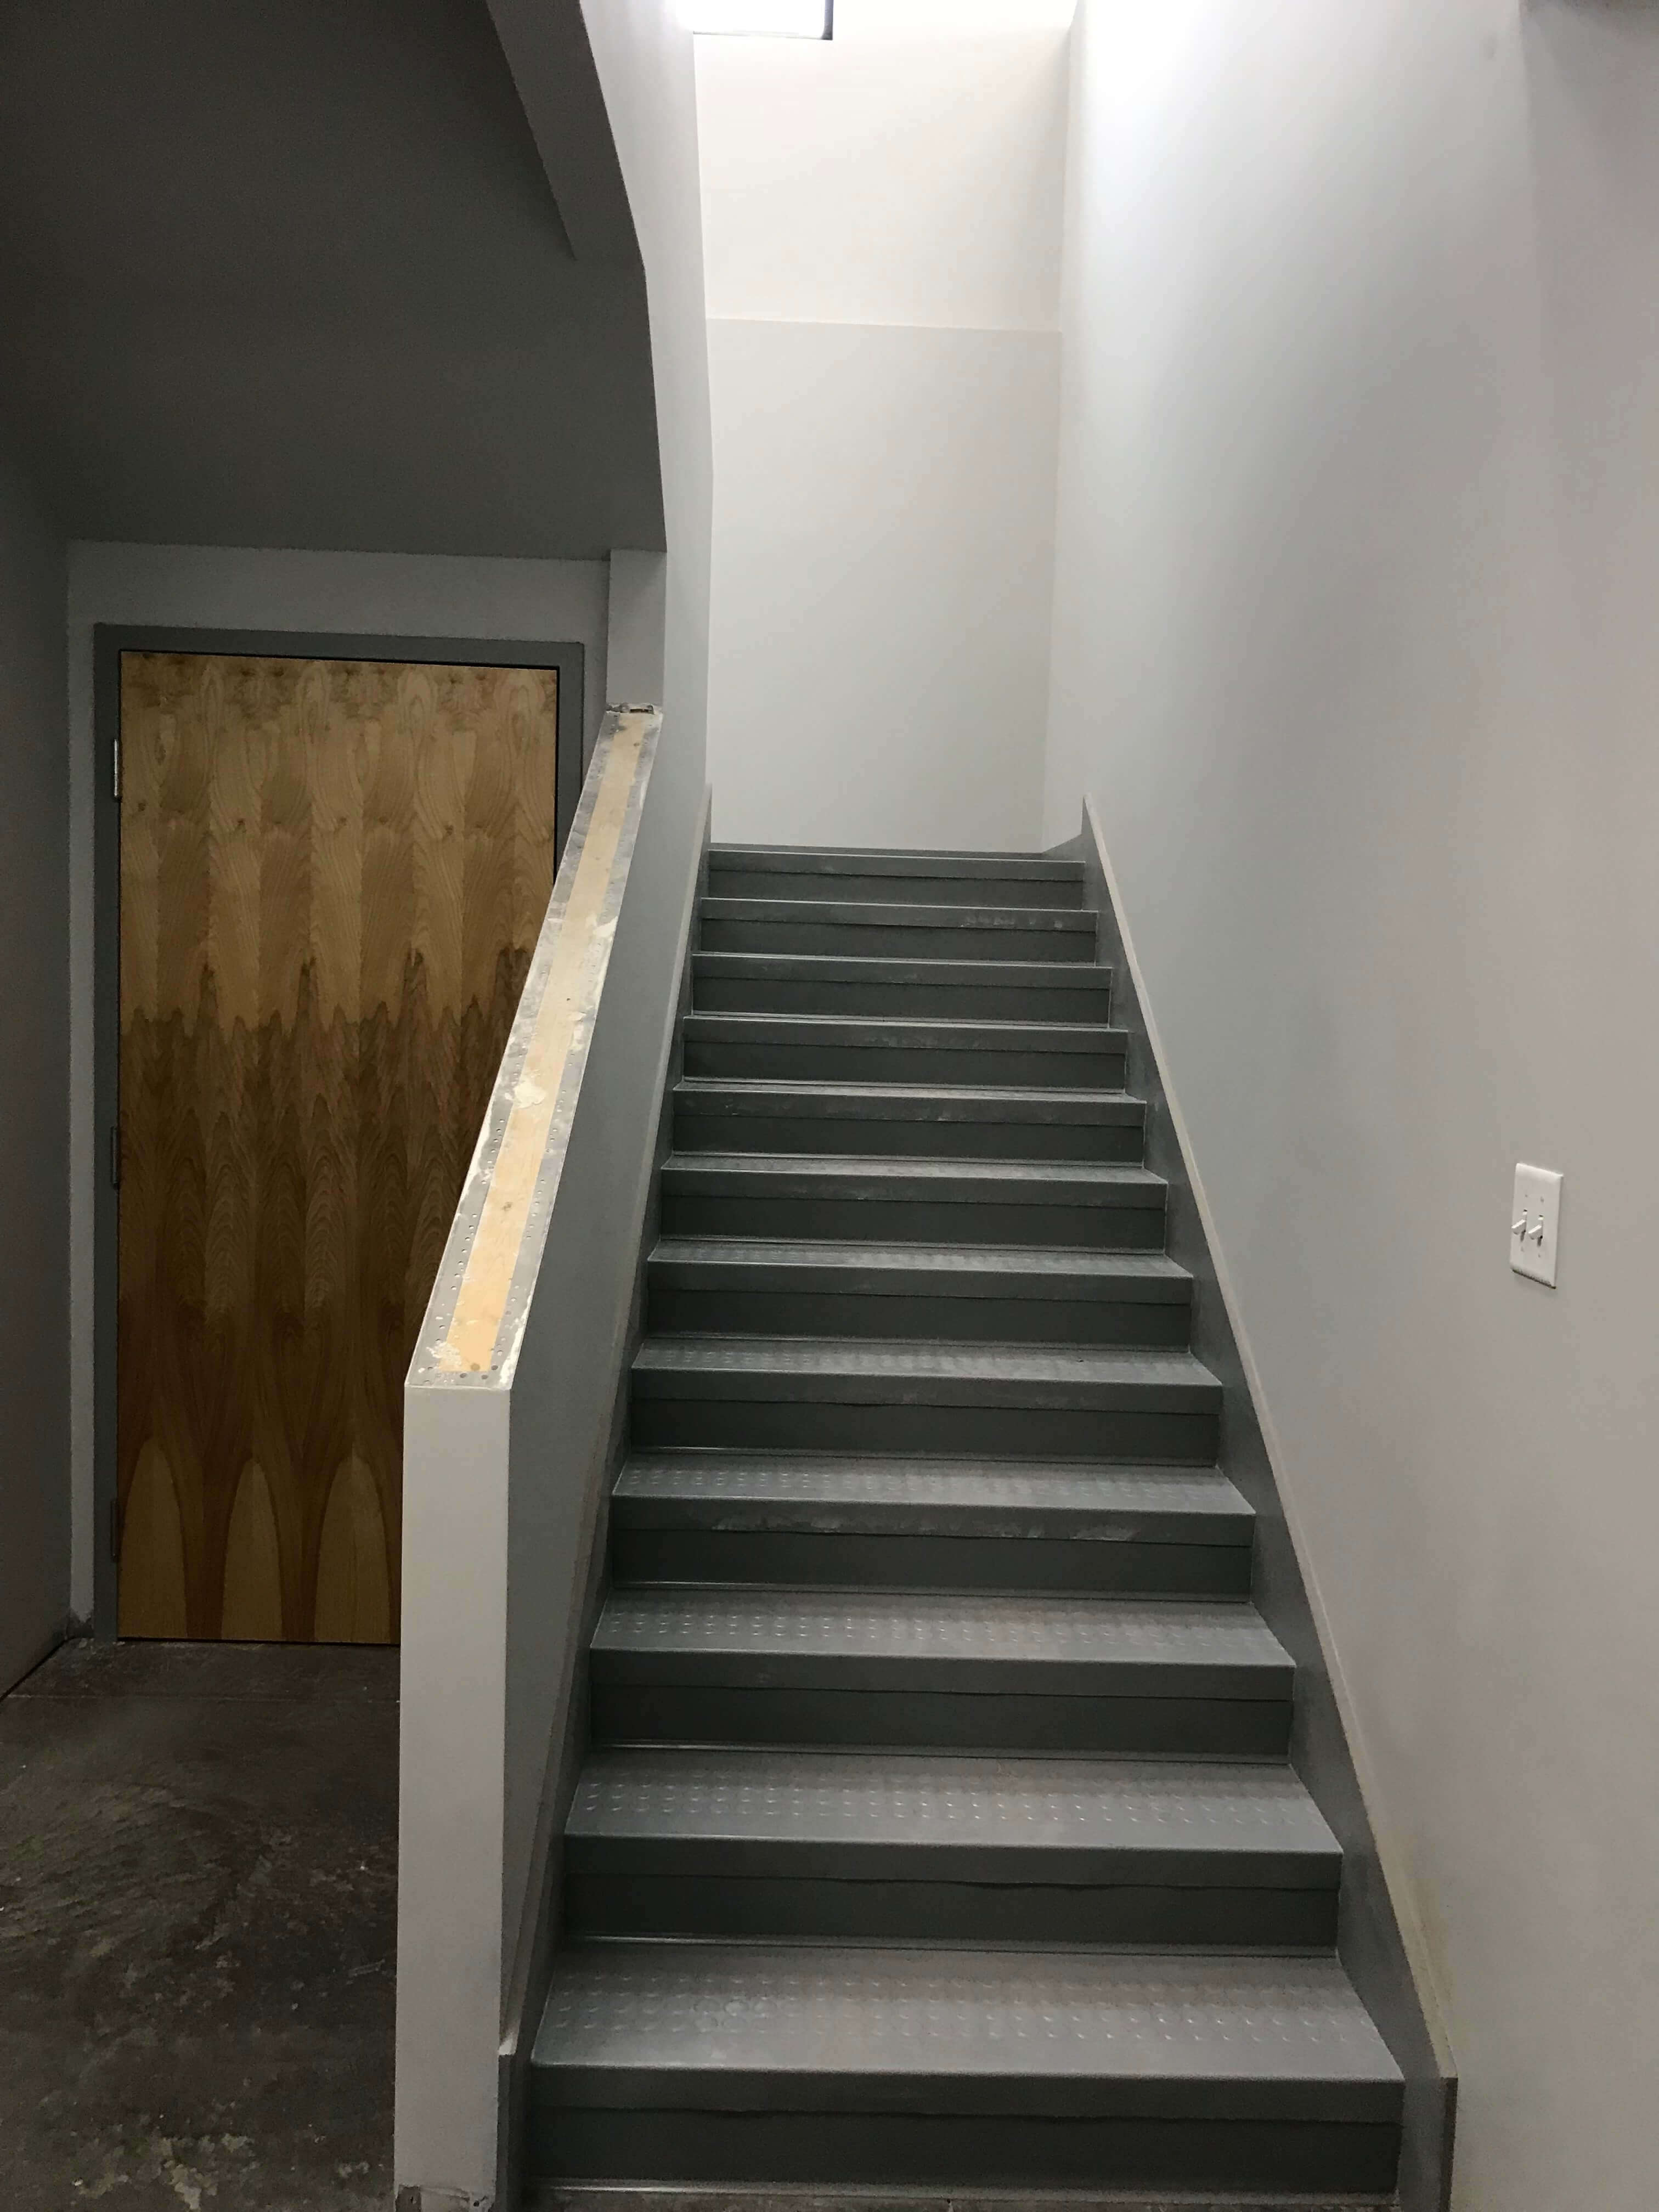 office stairwell under construction, office builders, commercial construction, commercial general contractors